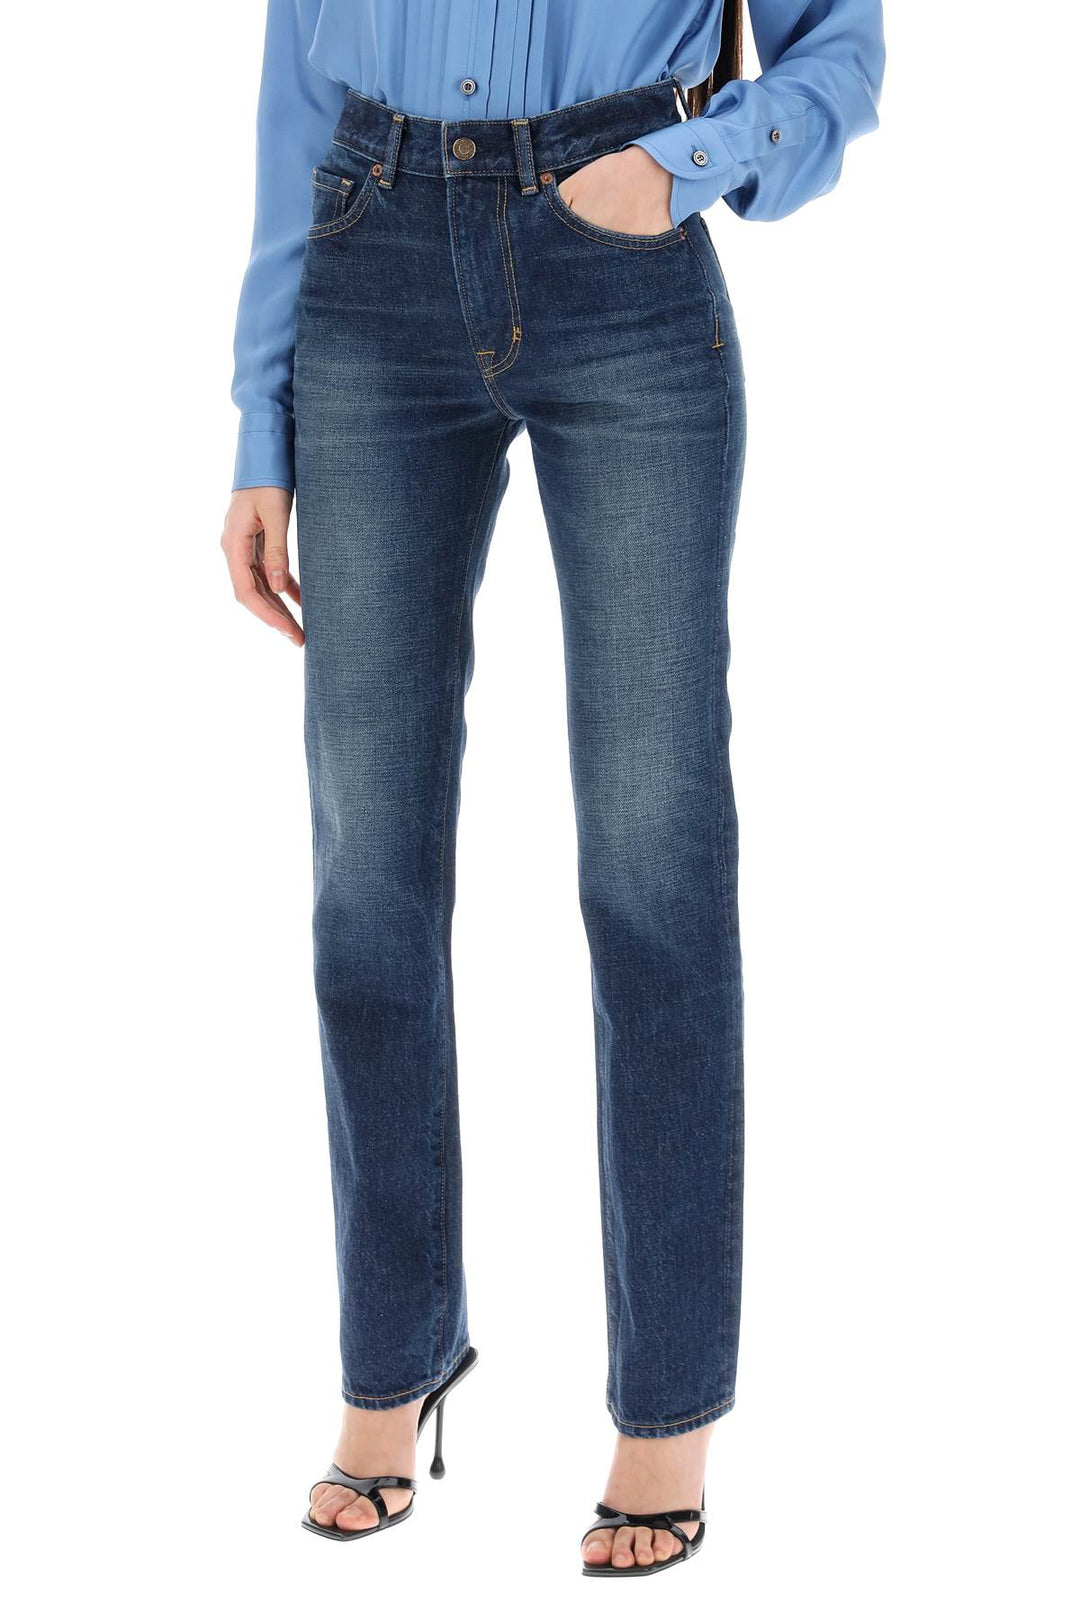 Tom Ford Jeans With Stone Wash Treatment   Blue